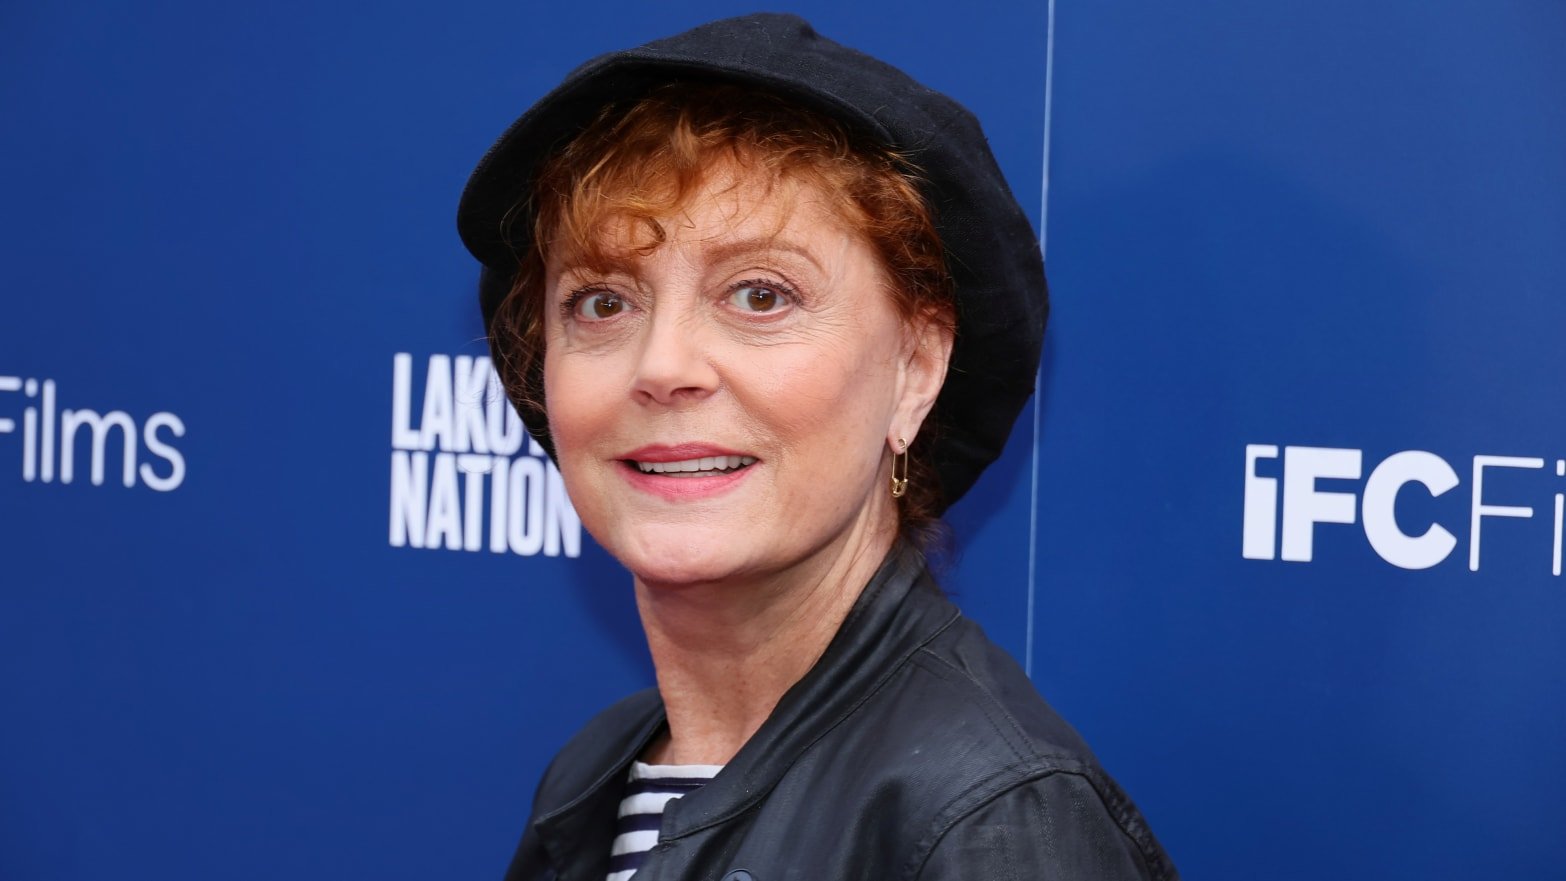 Susan Sarandon dropped from film project after anti-Jewish rant